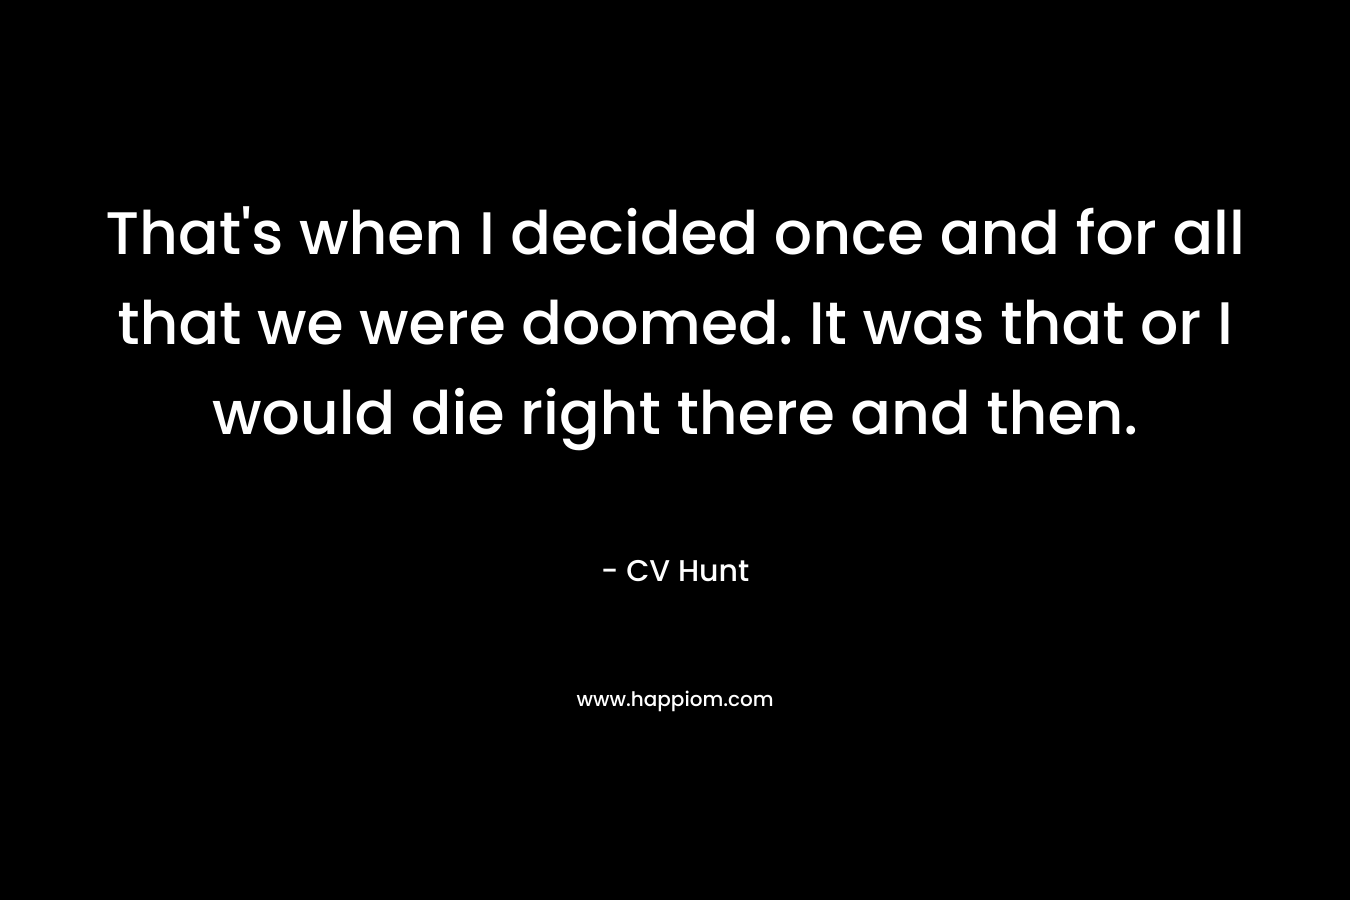 That’s when I decided once and for all that we were doomed. It was that or I would die right there and then. – CV Hunt